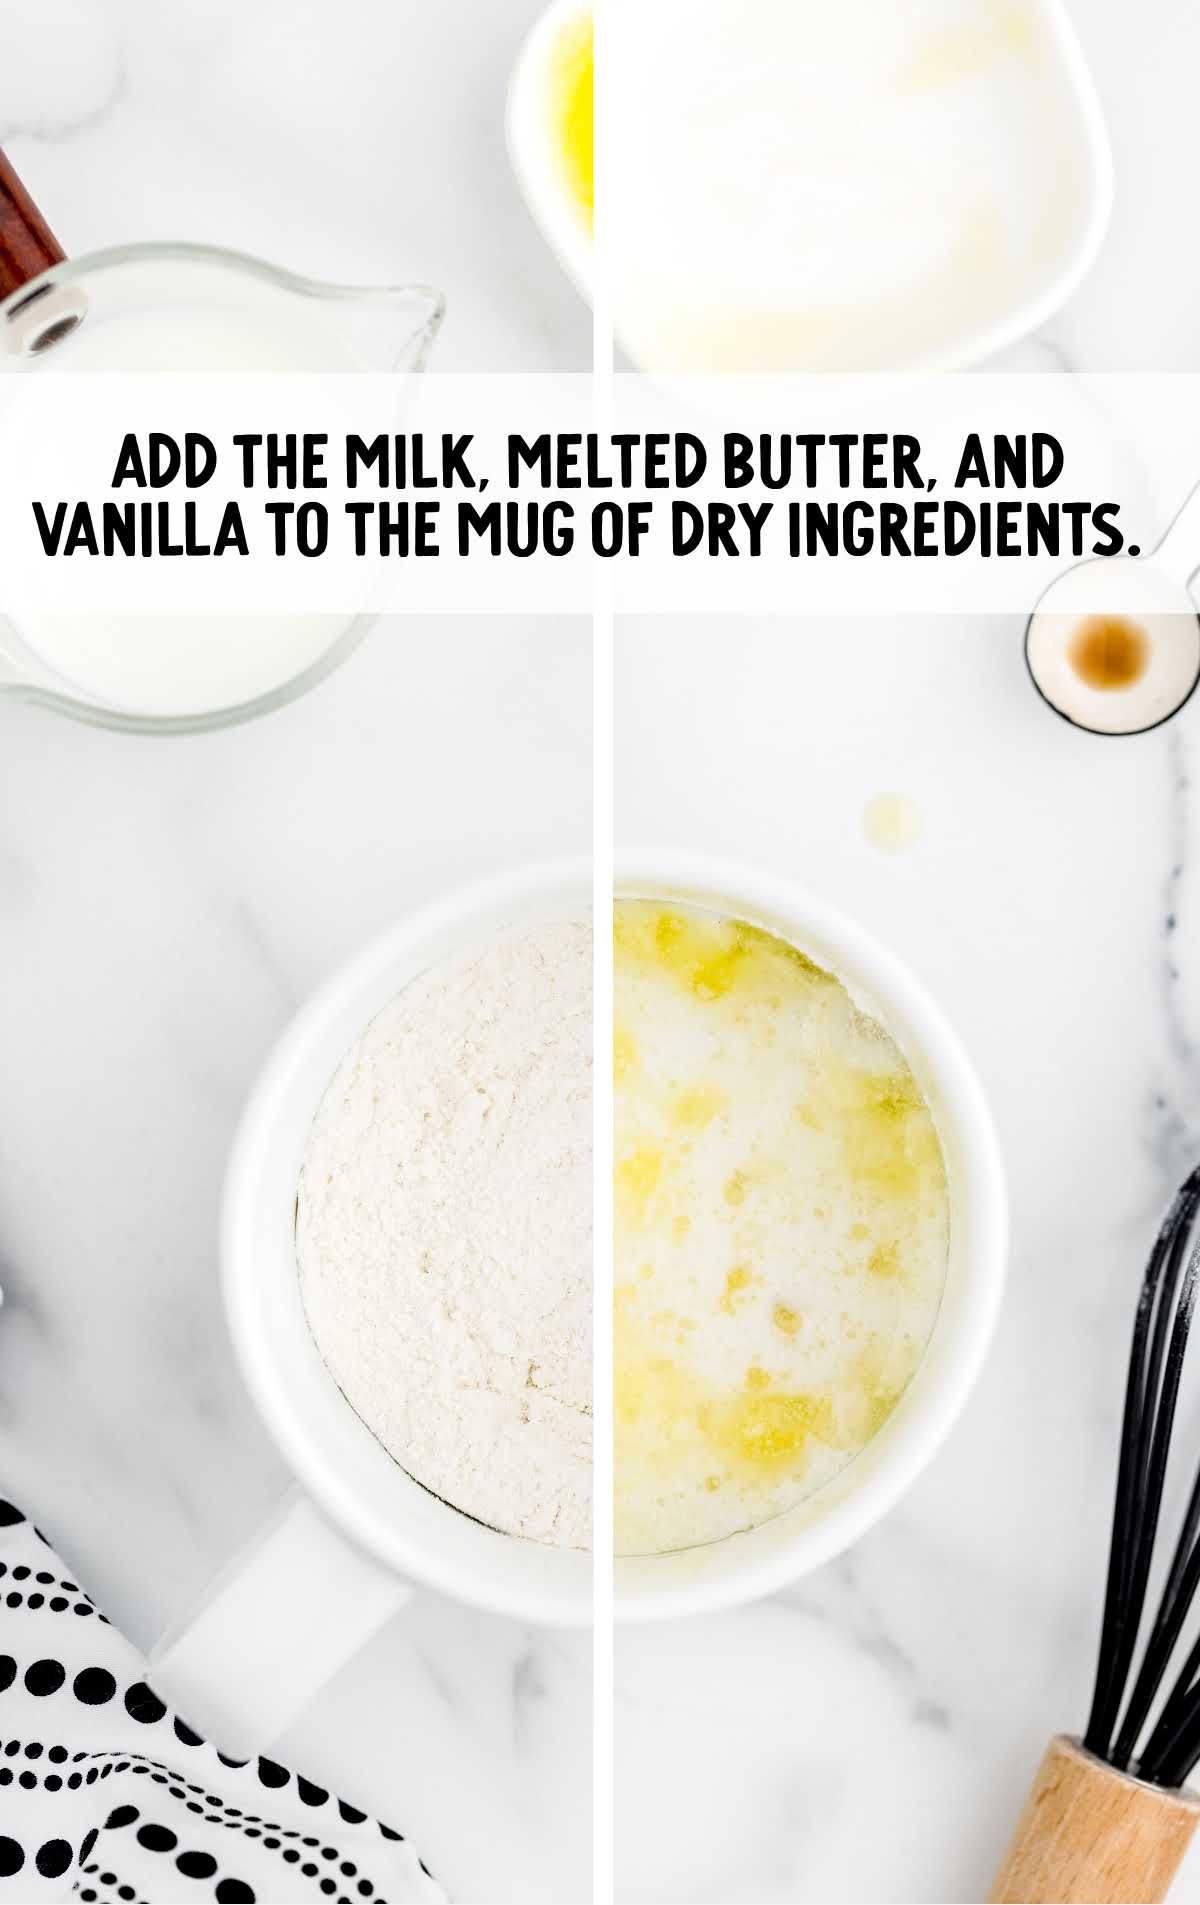 milk, melted butter, and vanilla added to the dry ingredients in a mug